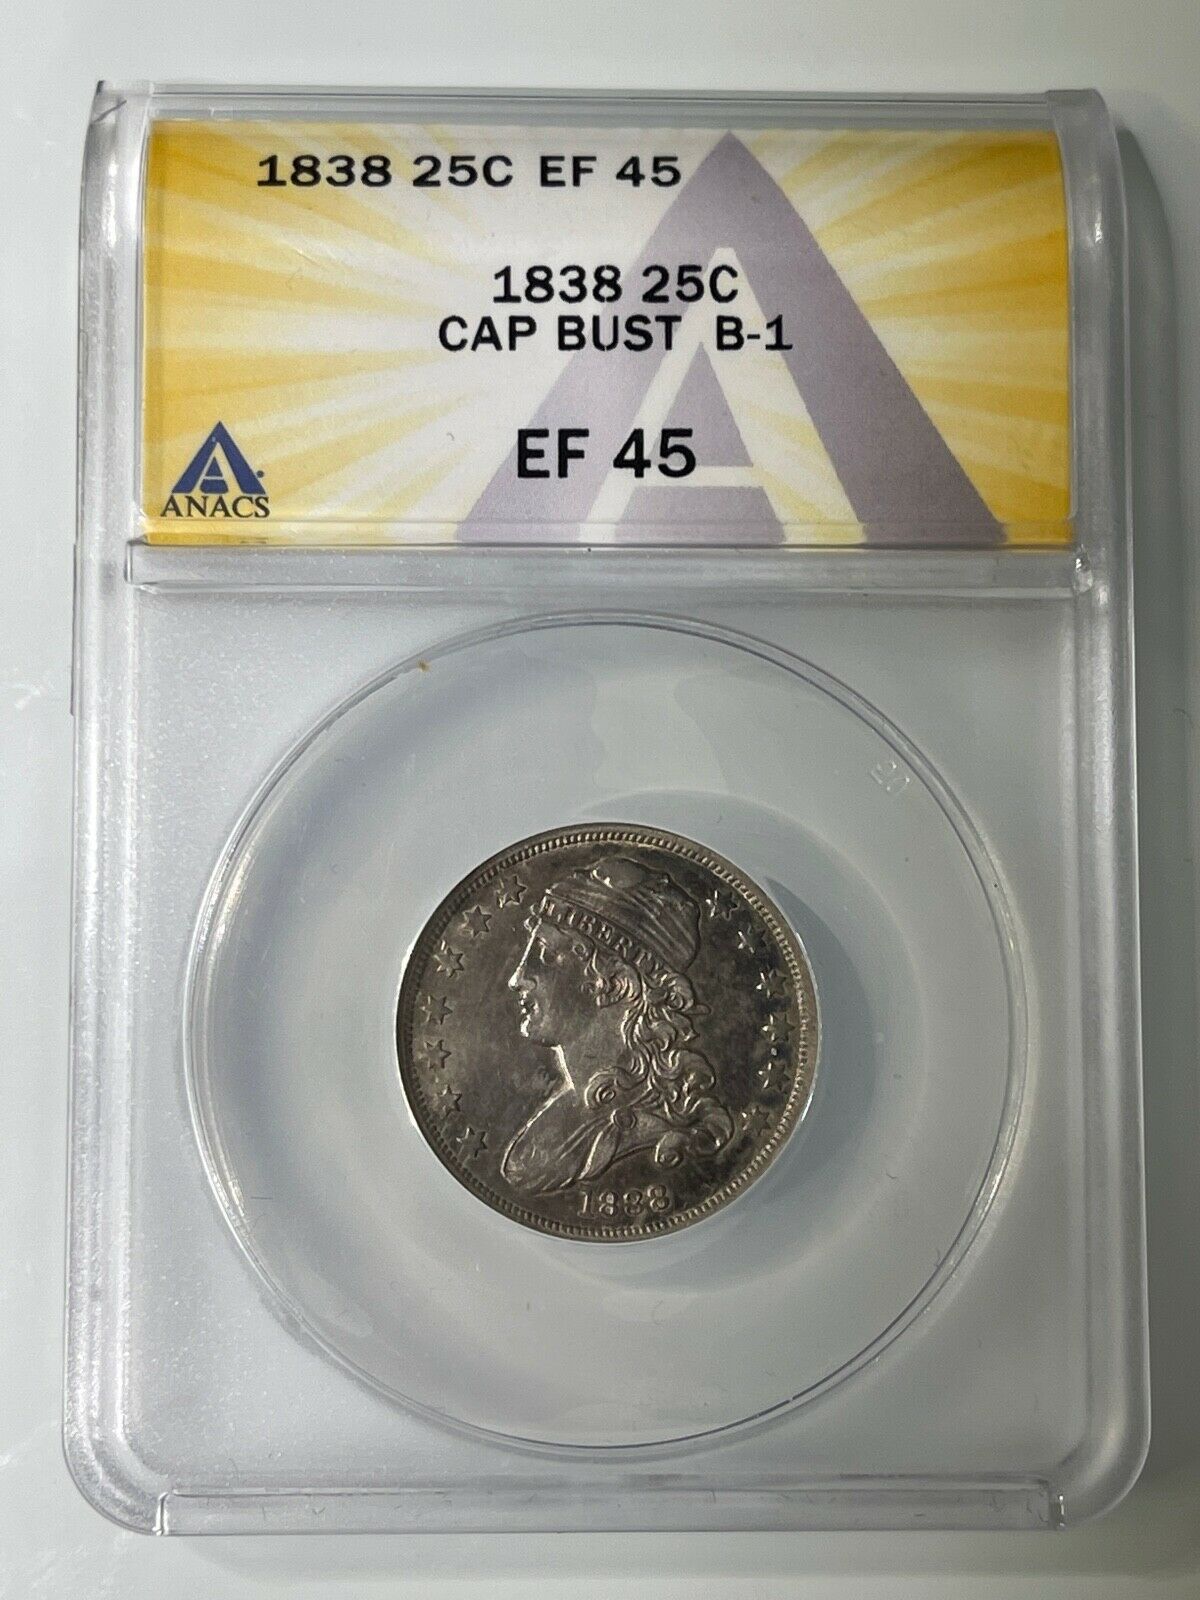 1838 Capped Bust B-1 Silver Quarter 25c Coin Anacs Ef-45